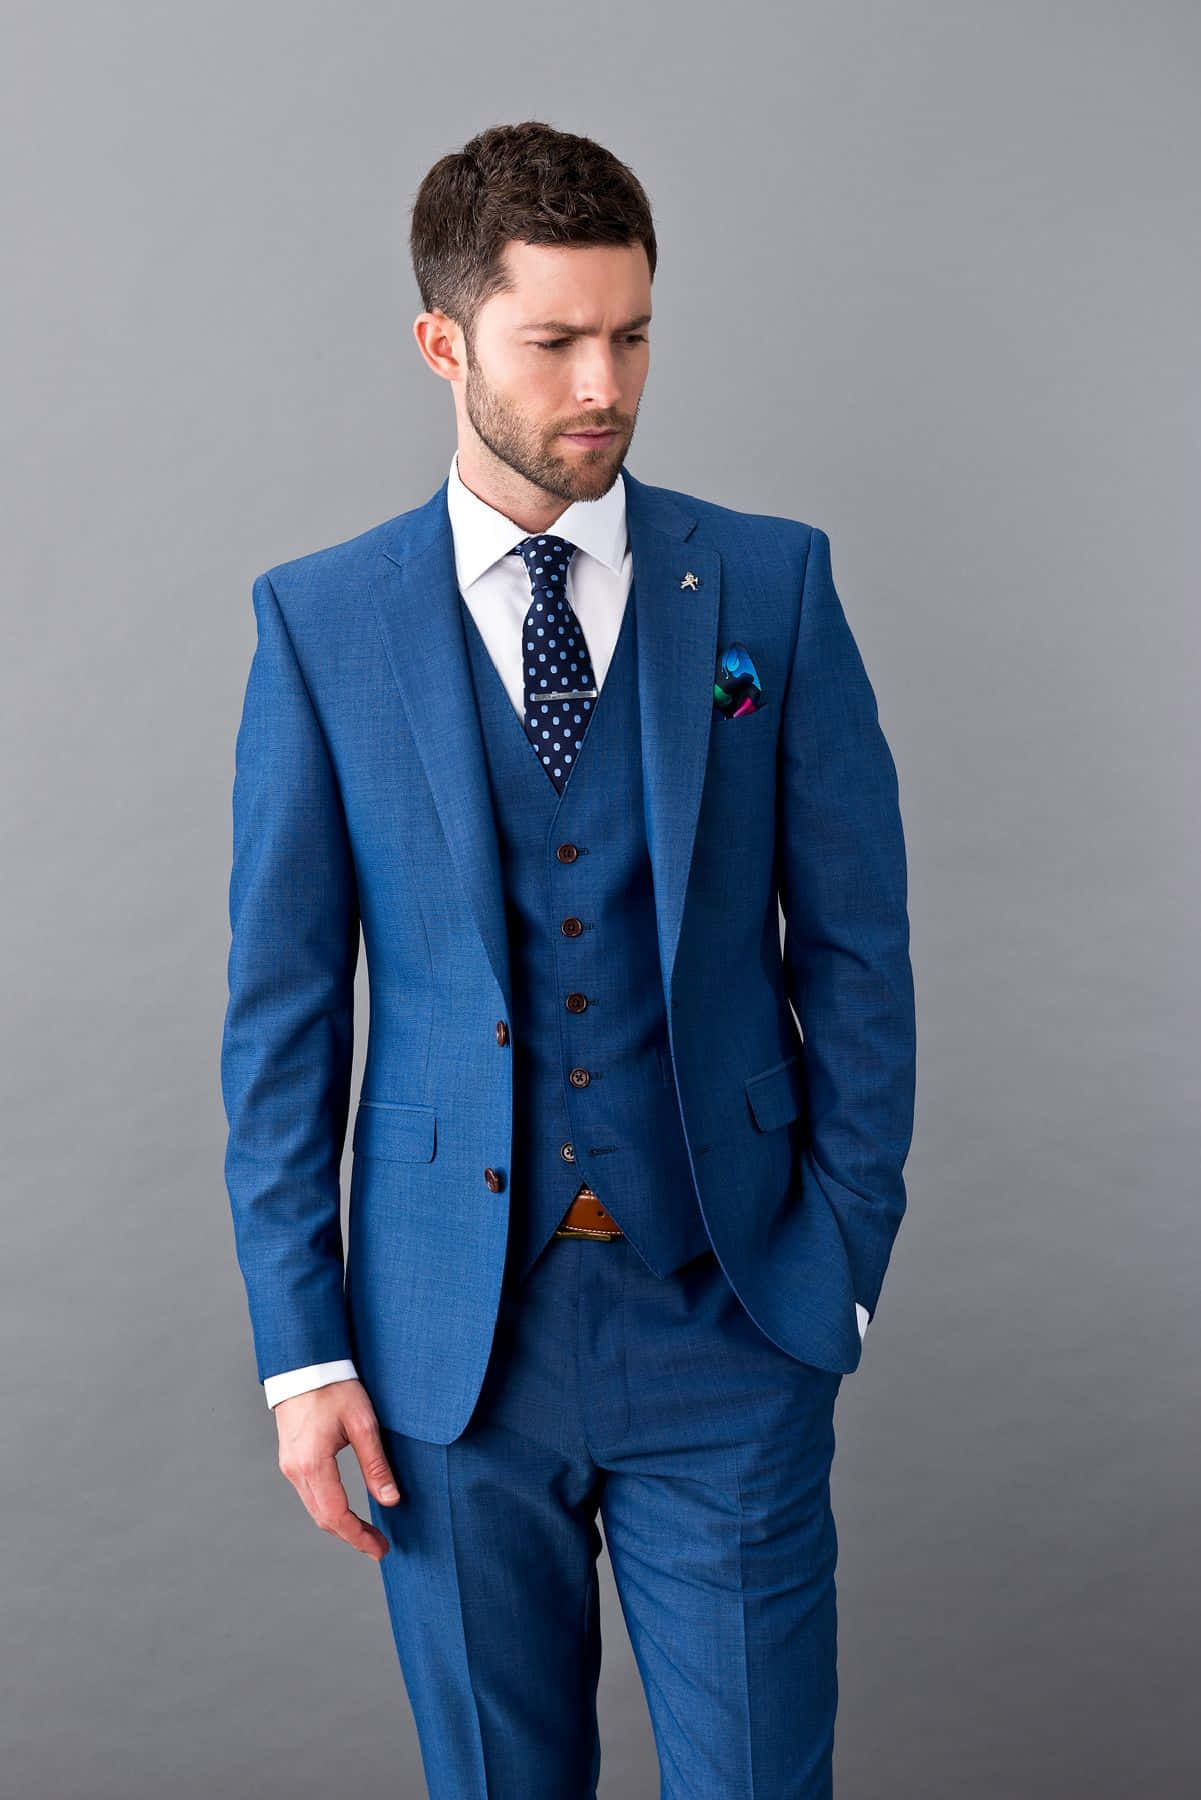 Step up your wardrobe with a great-looking suit